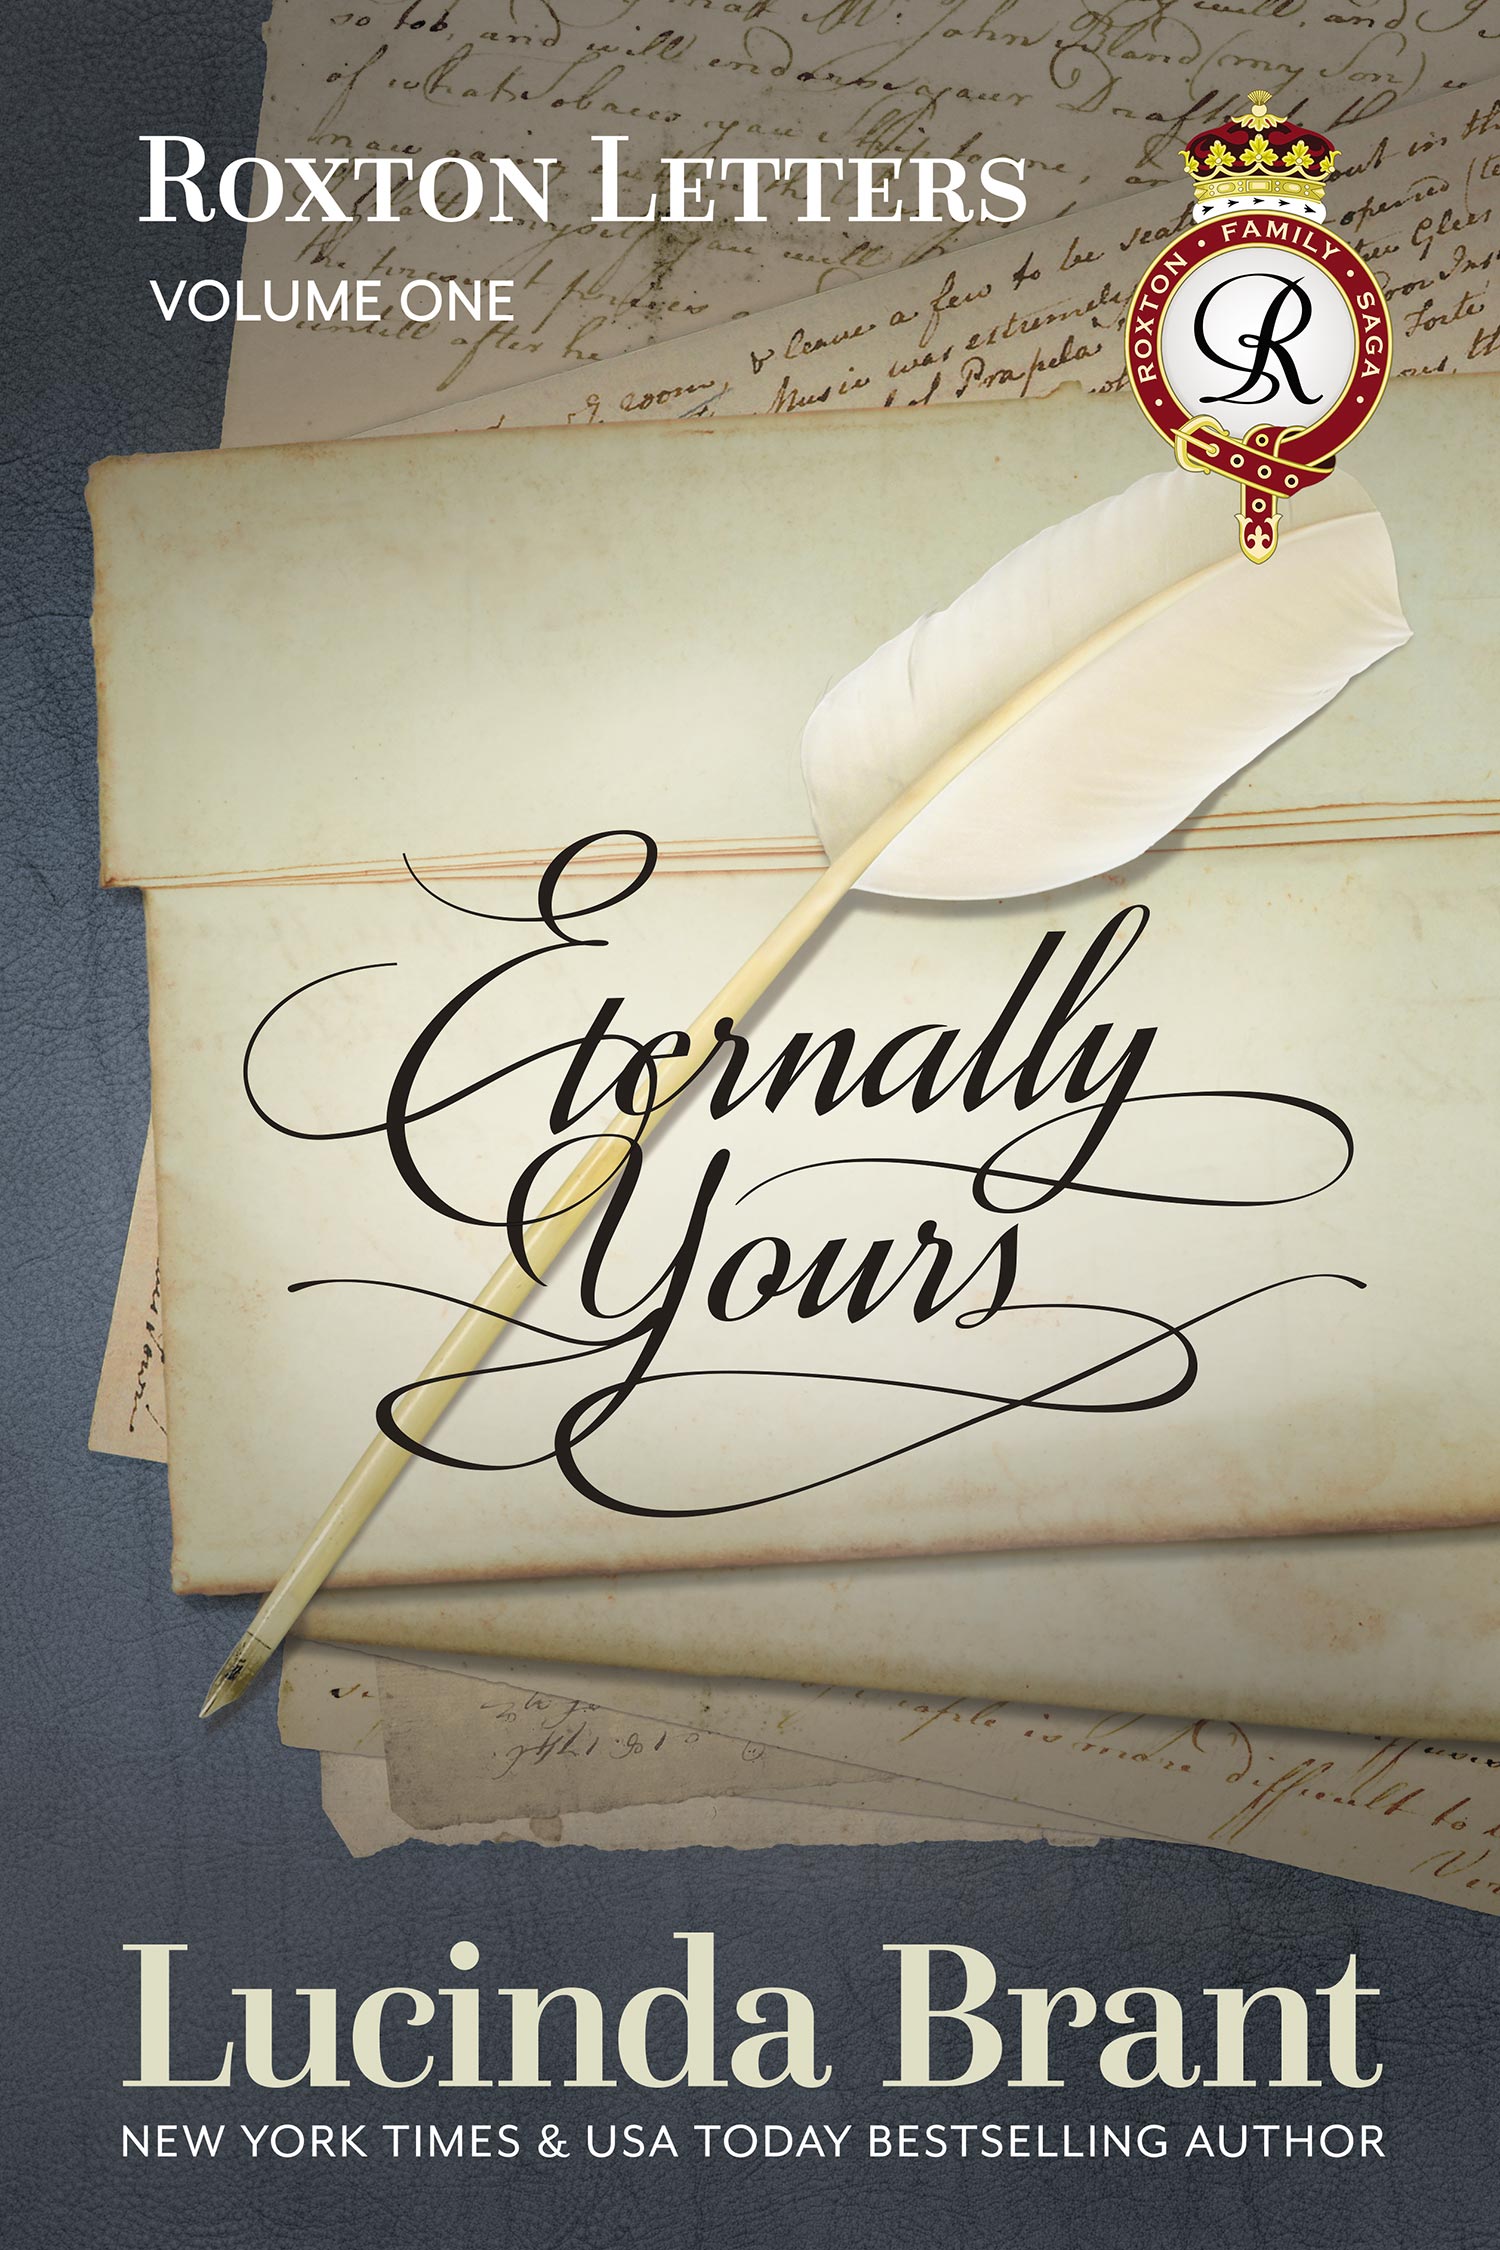 Eternally Yours: Roxton Letters Volume One by Lucinda Brant